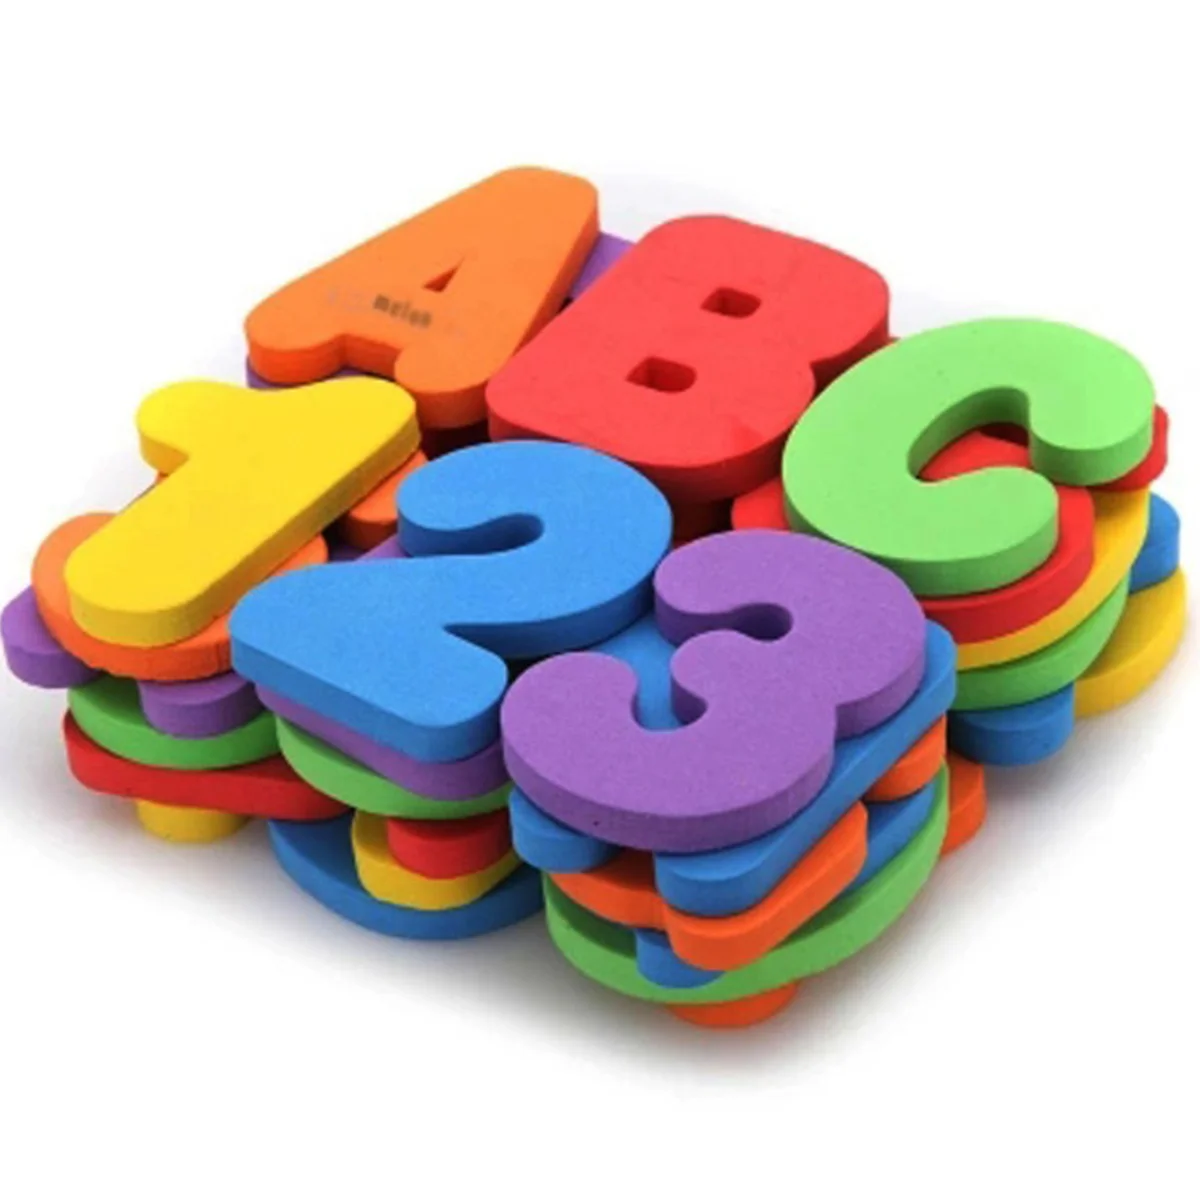 

36PCS Bath Toys Letters Numbers Bath Organizer Alphabet Educational Bath Water Toys for Kids Toddlers